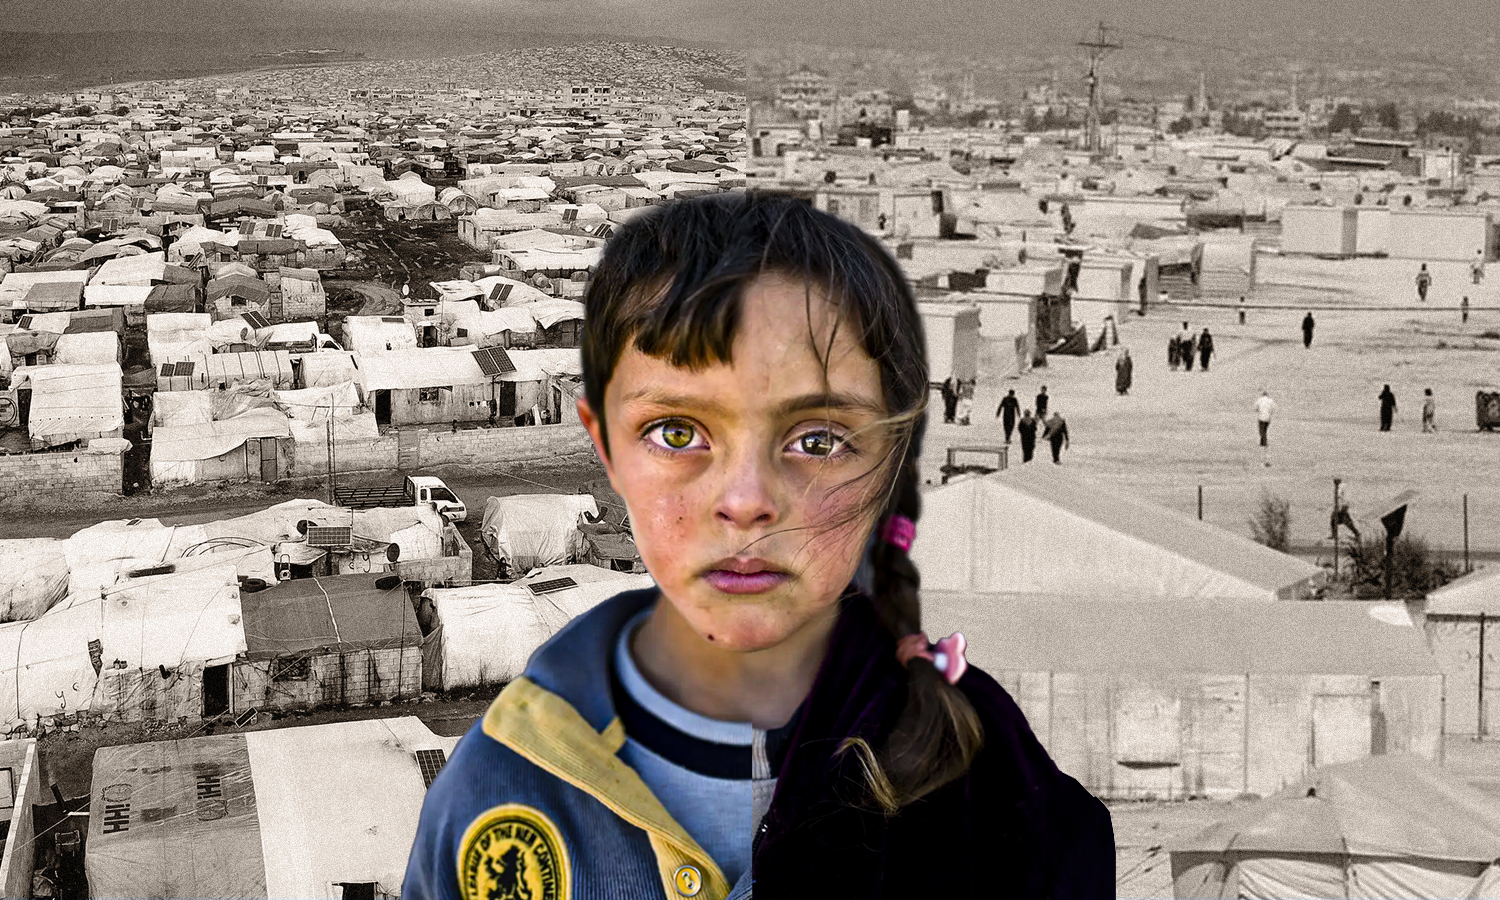 Syrian refugees in Lebanon and Jordan are victims of the UN aid cut (Edited by Enab Baladi)